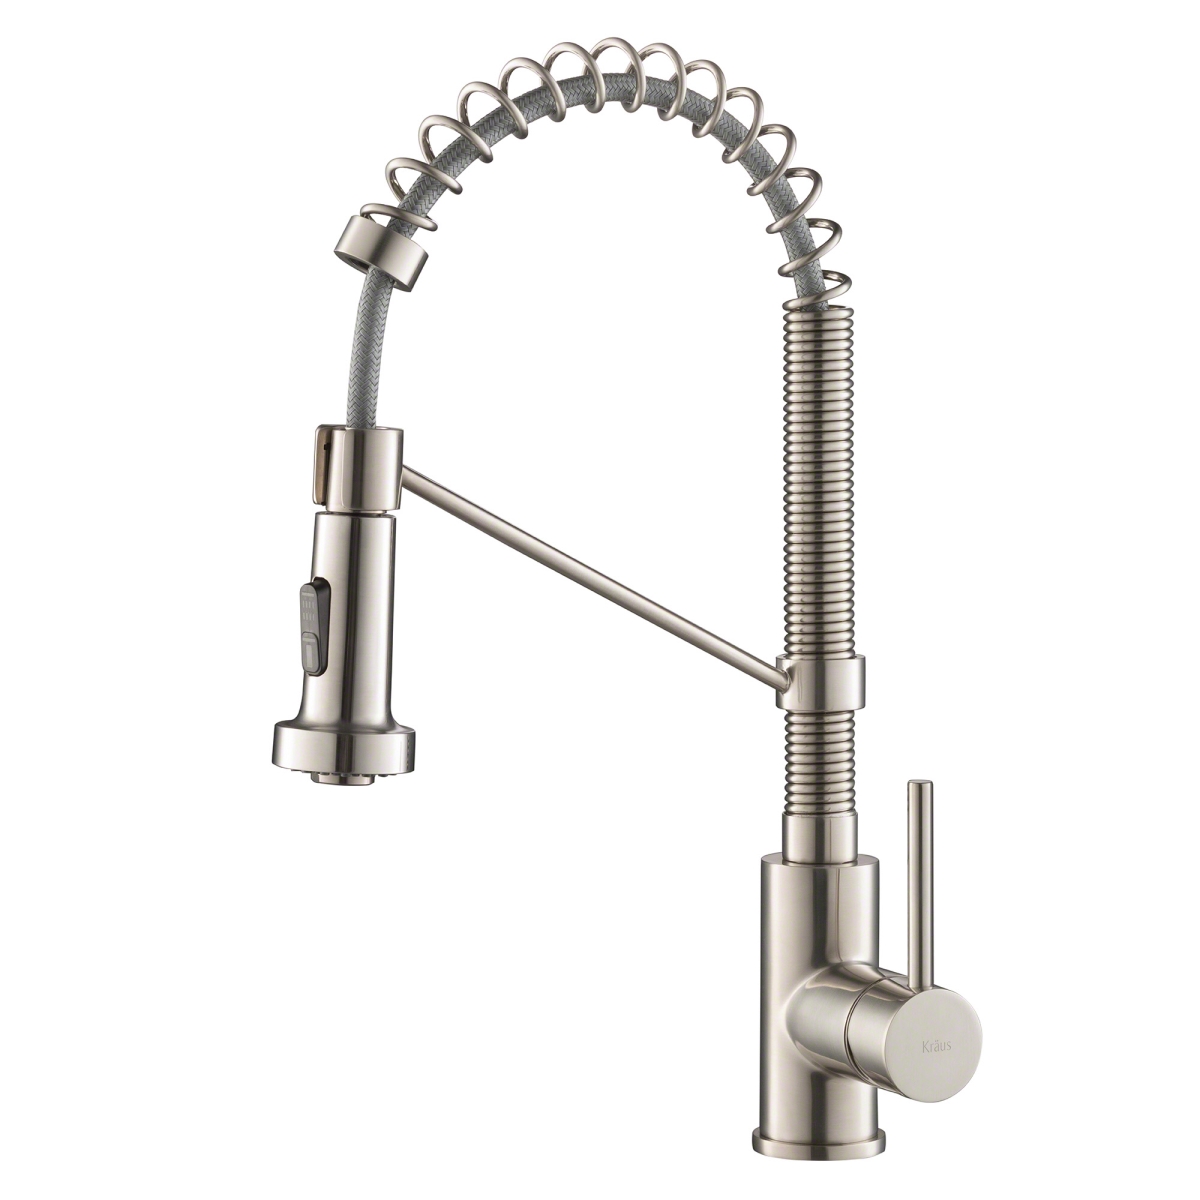 Kraus Kpf-1610ss 18 In. Commercial Kitchen Faucet With Dual Function Pull Down Sprayhead In Stainless Steel